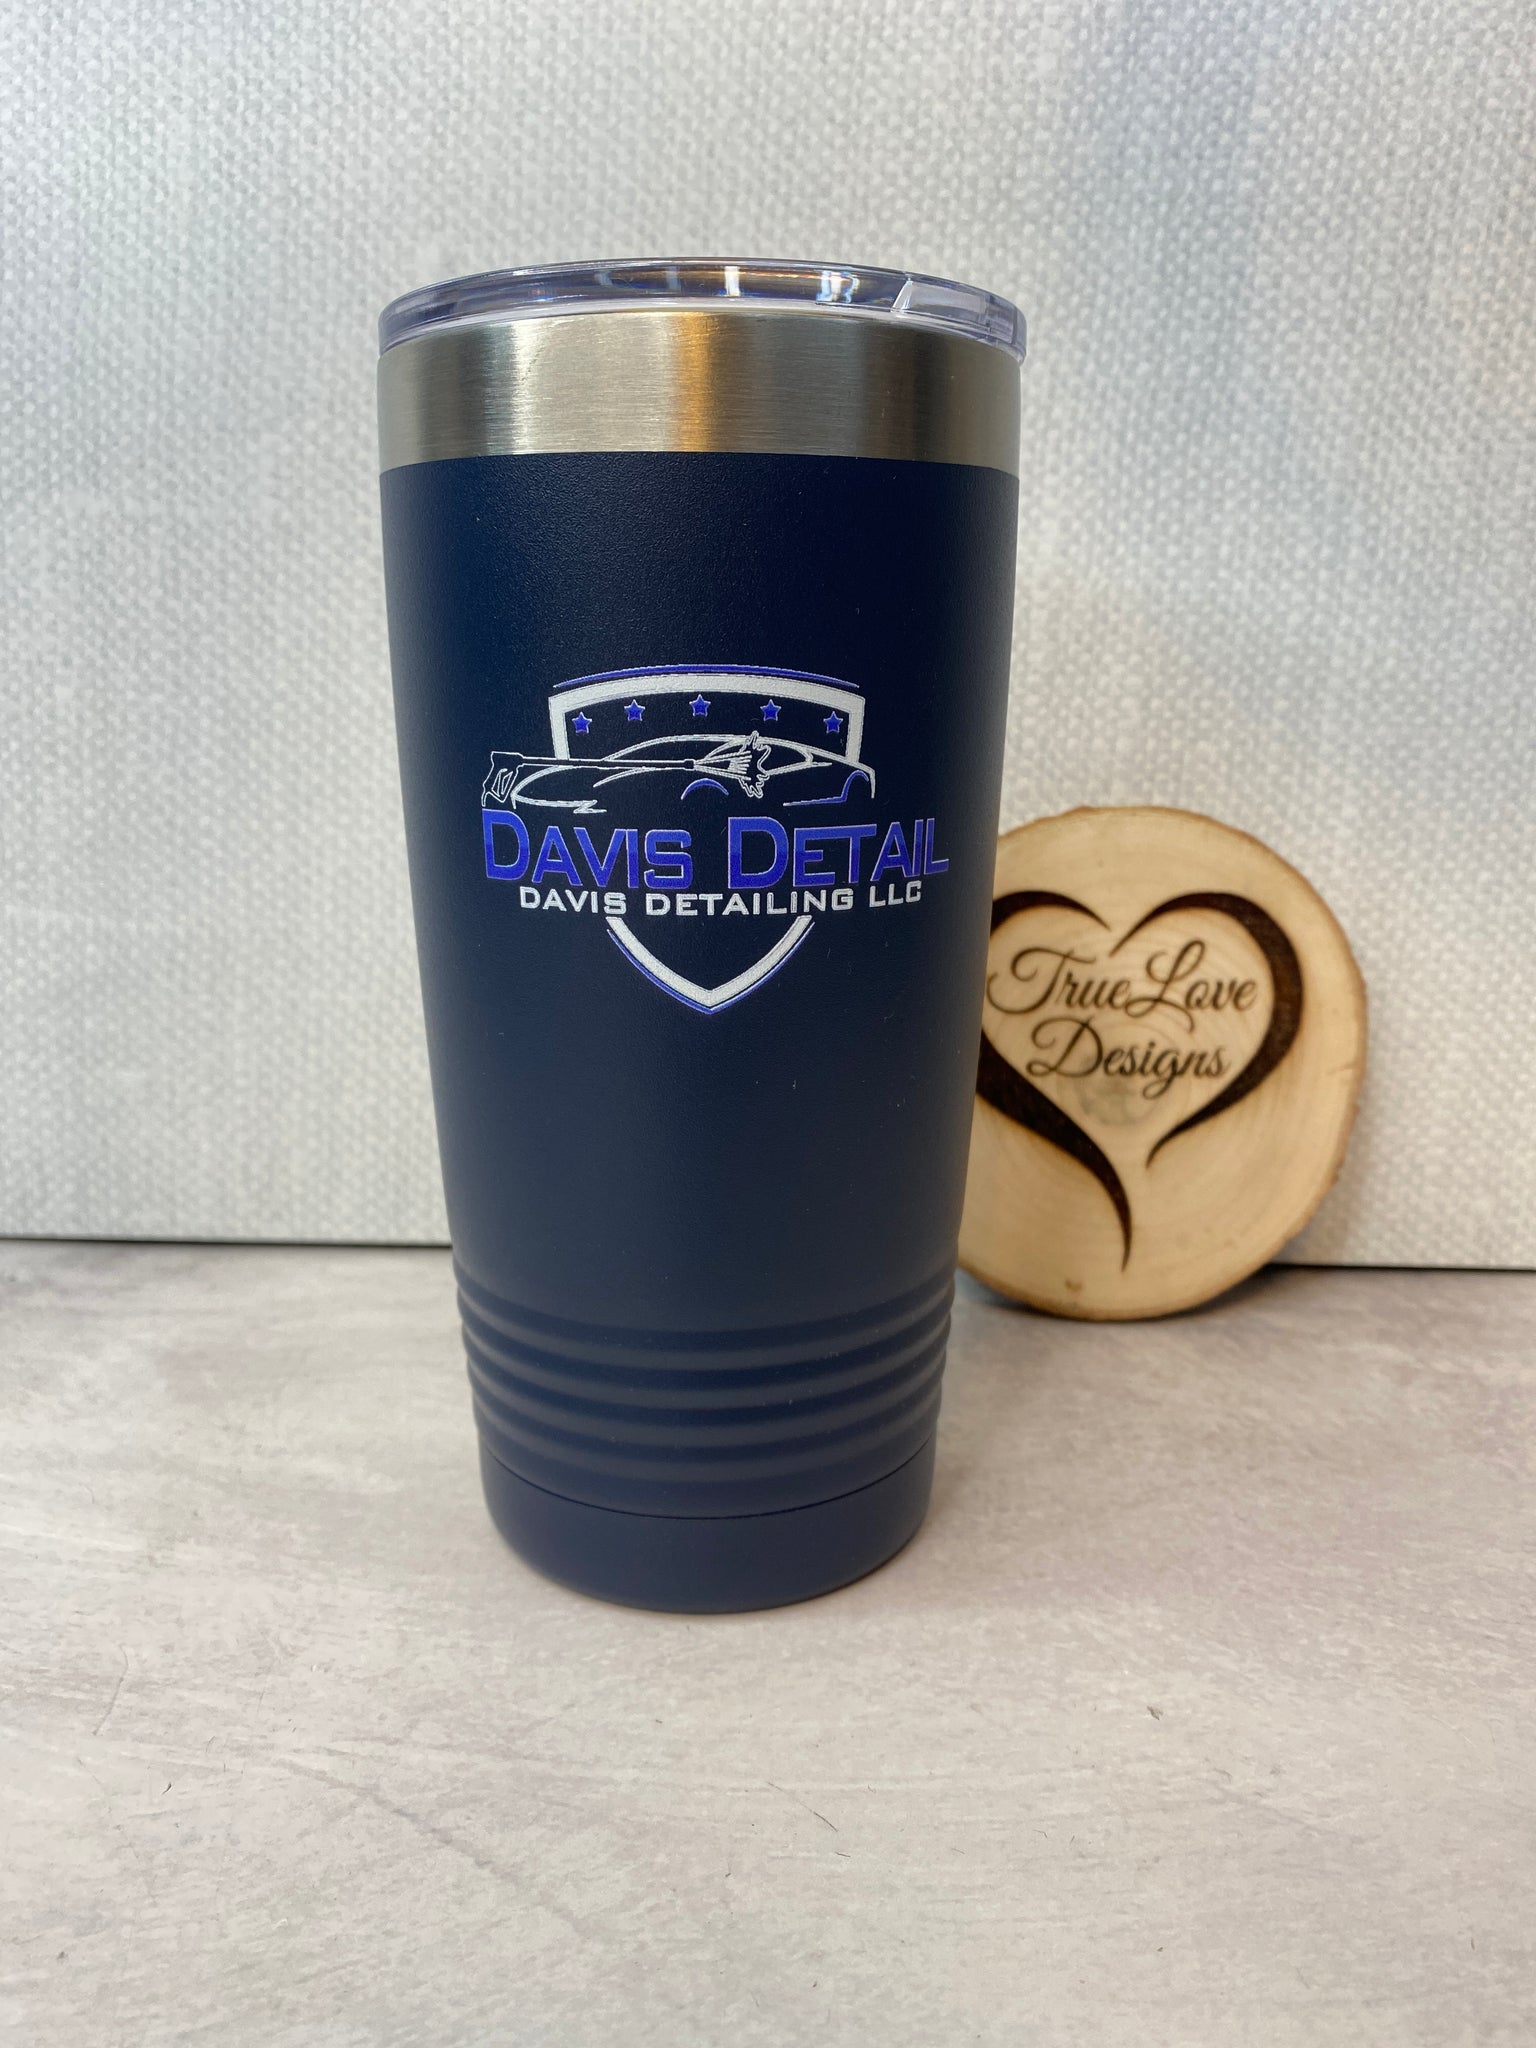 Personalized Gifts | Custom Engraved Gift Ideas - MemorableGifts.com